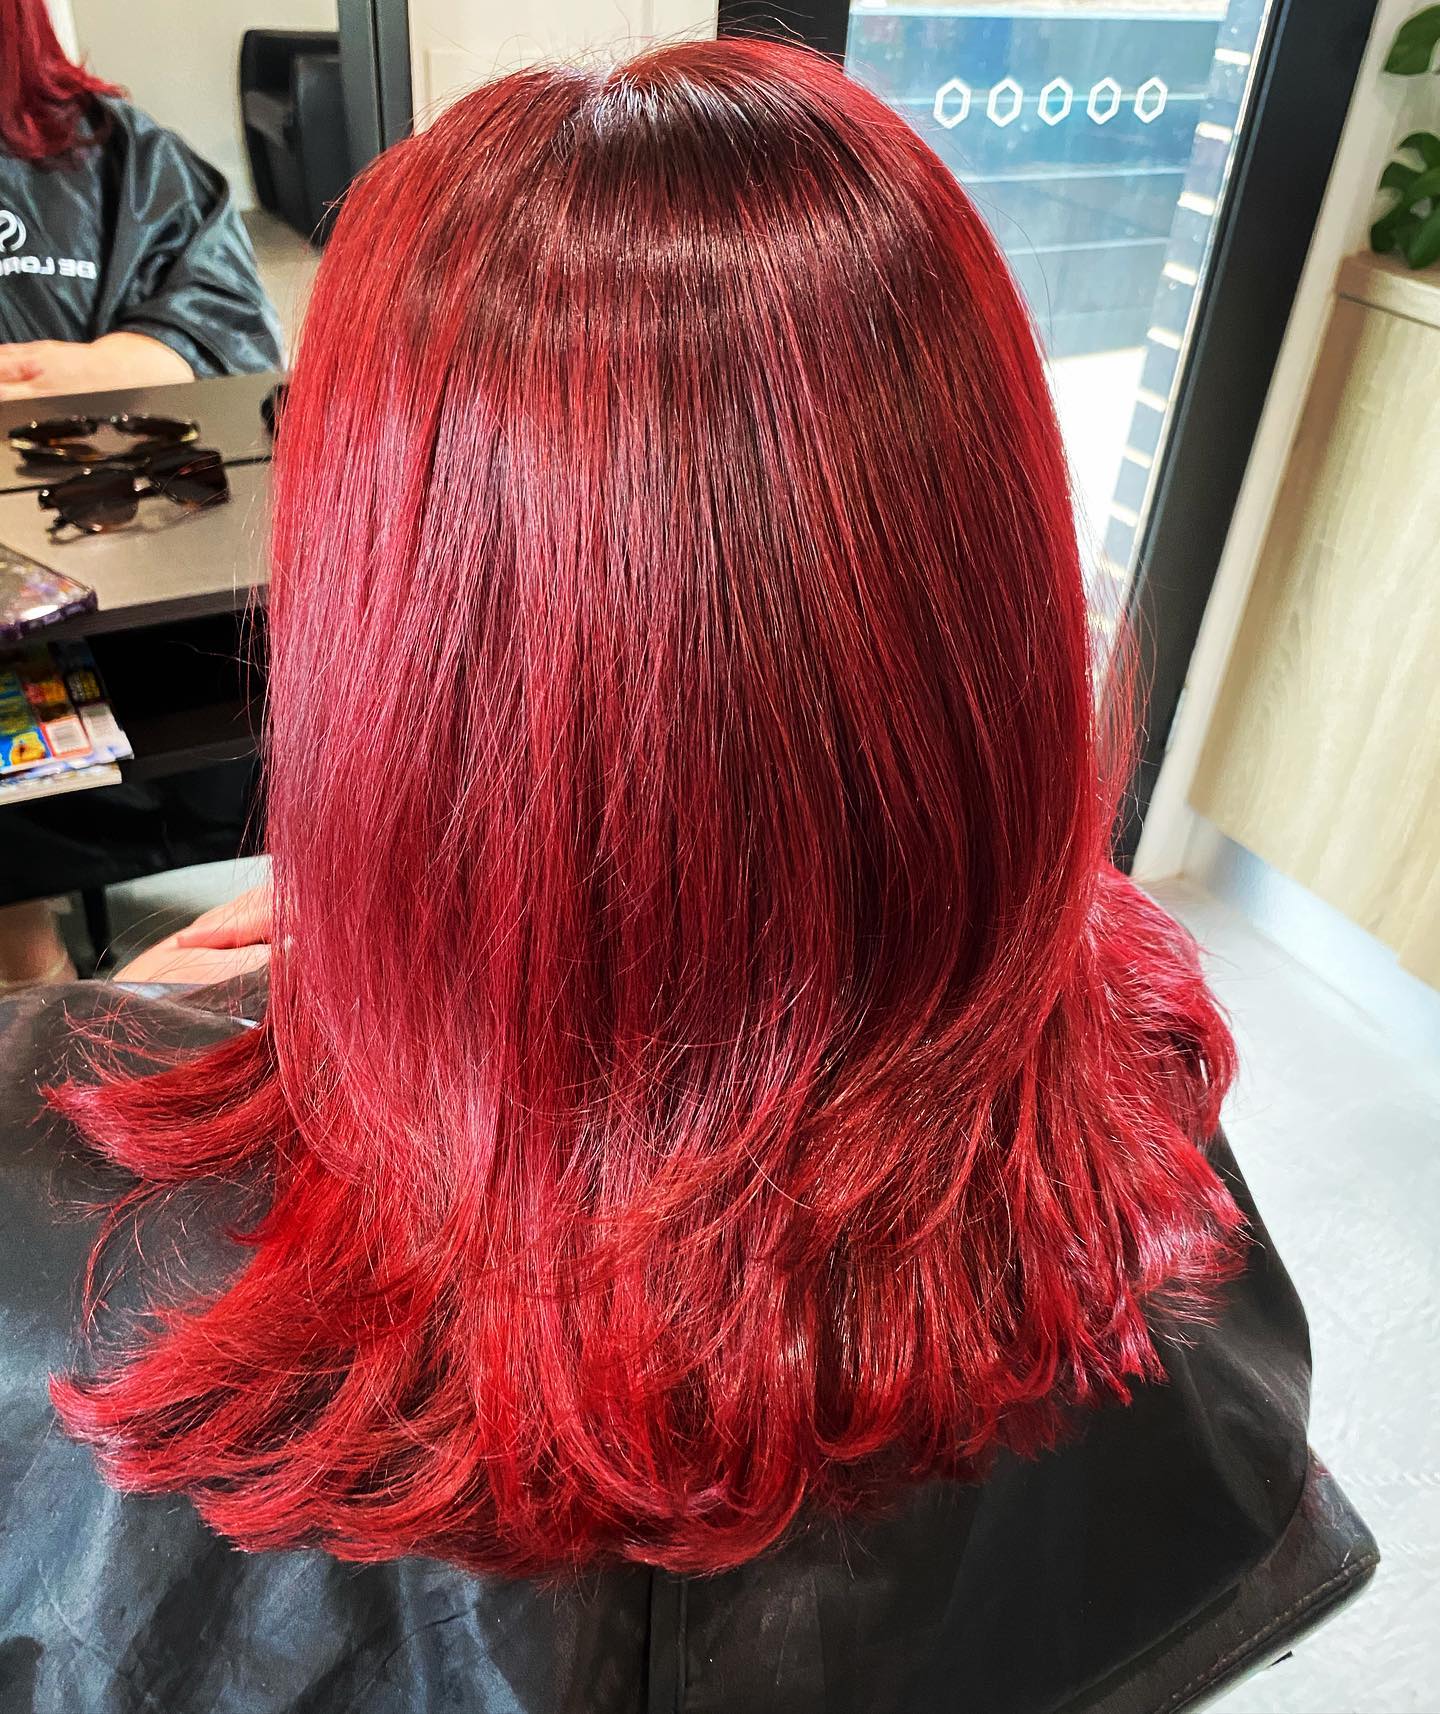 red ombre hair style 78 Natural red ombre hair | Red ombre background | Red ombre hair Red Ombre Hairstyles